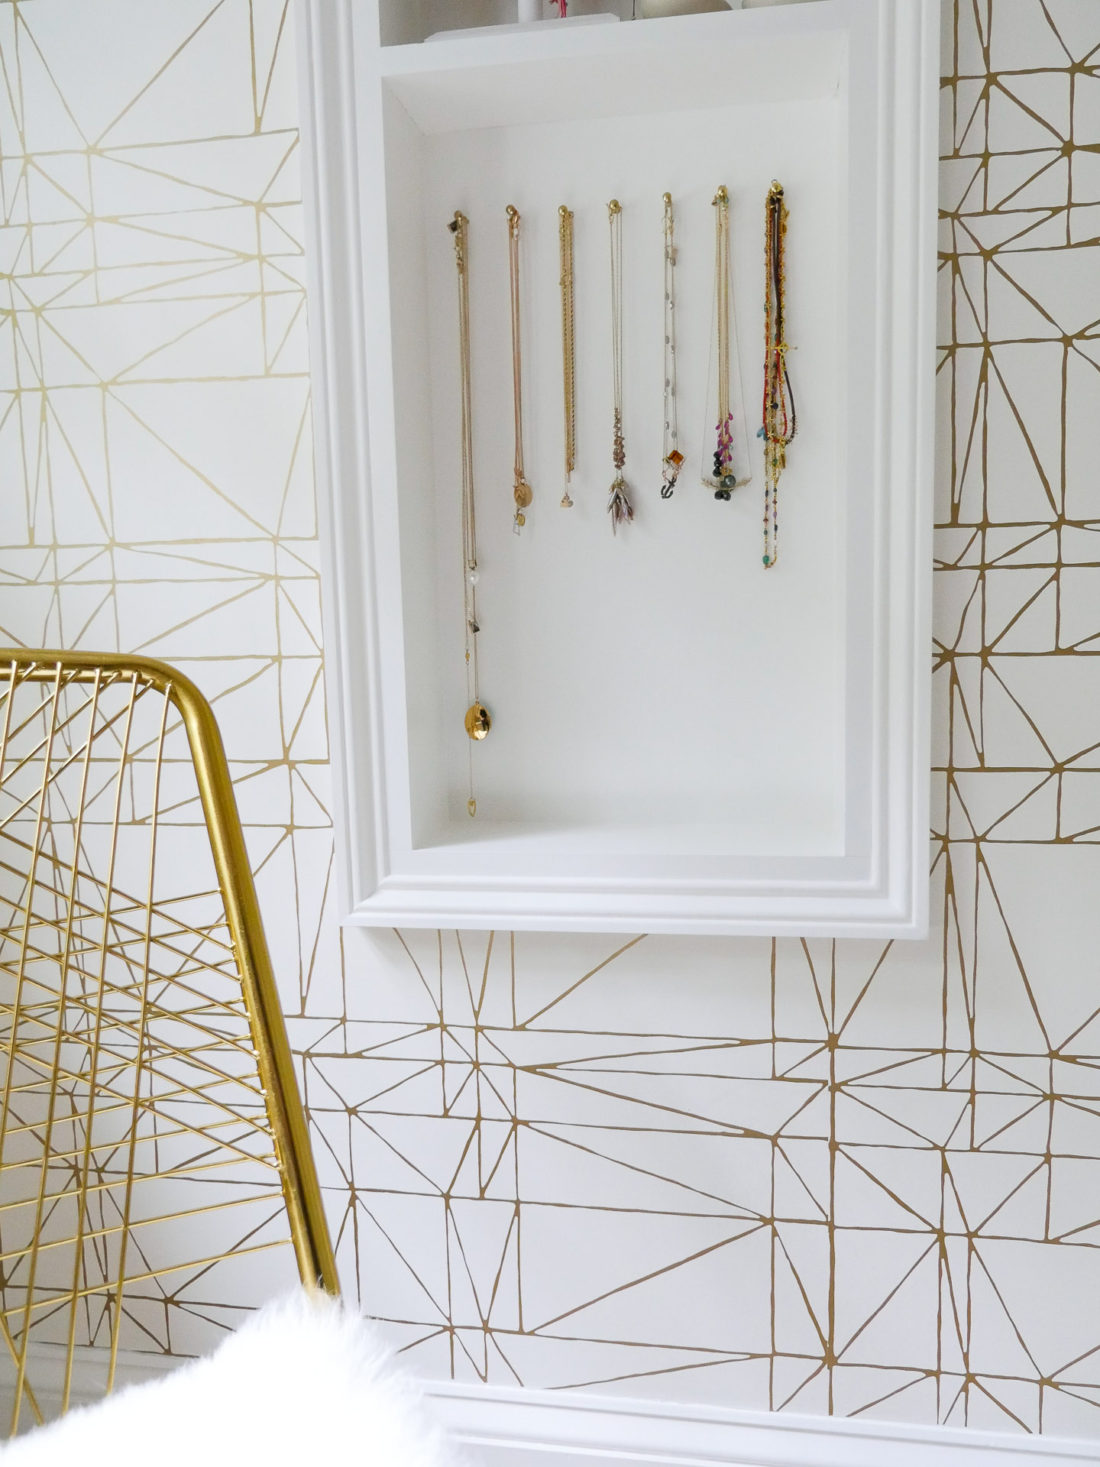 A close up of the necklace display in Eva Amurri Martino's glam room in her connecticut home featuring various gold necklaces